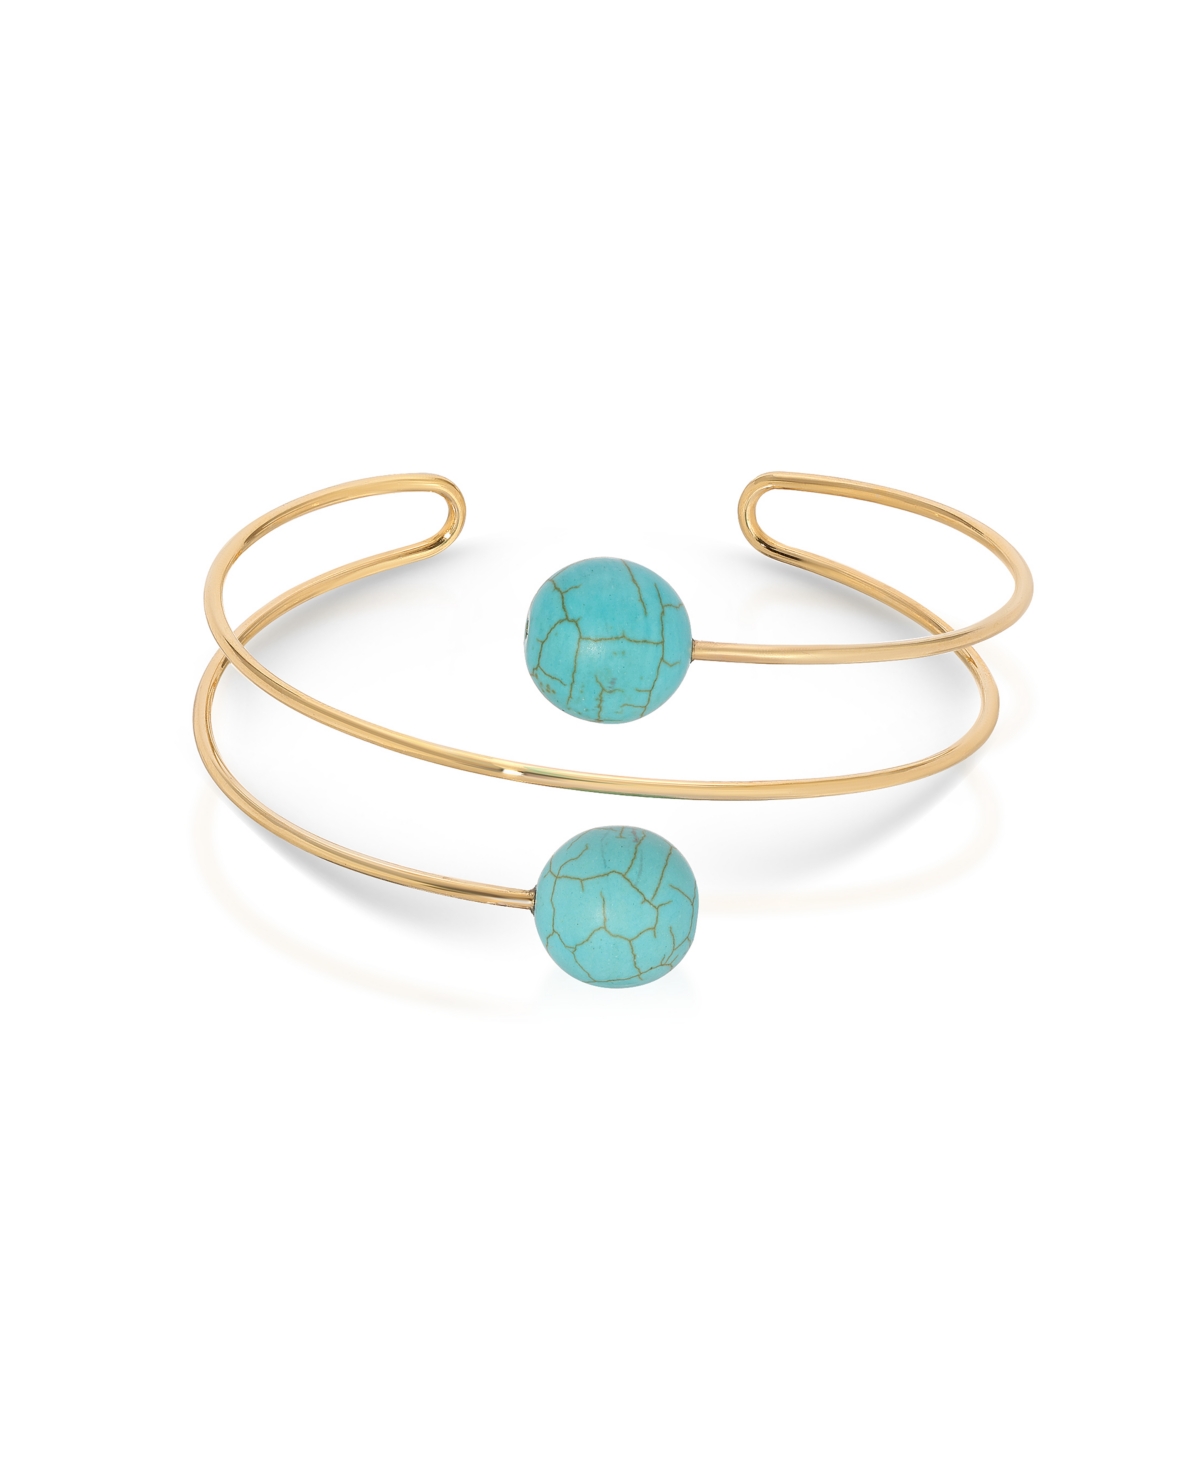 Turquoise Bead 18k Gold Plated Wire Cuff Bracelet - Turquoise